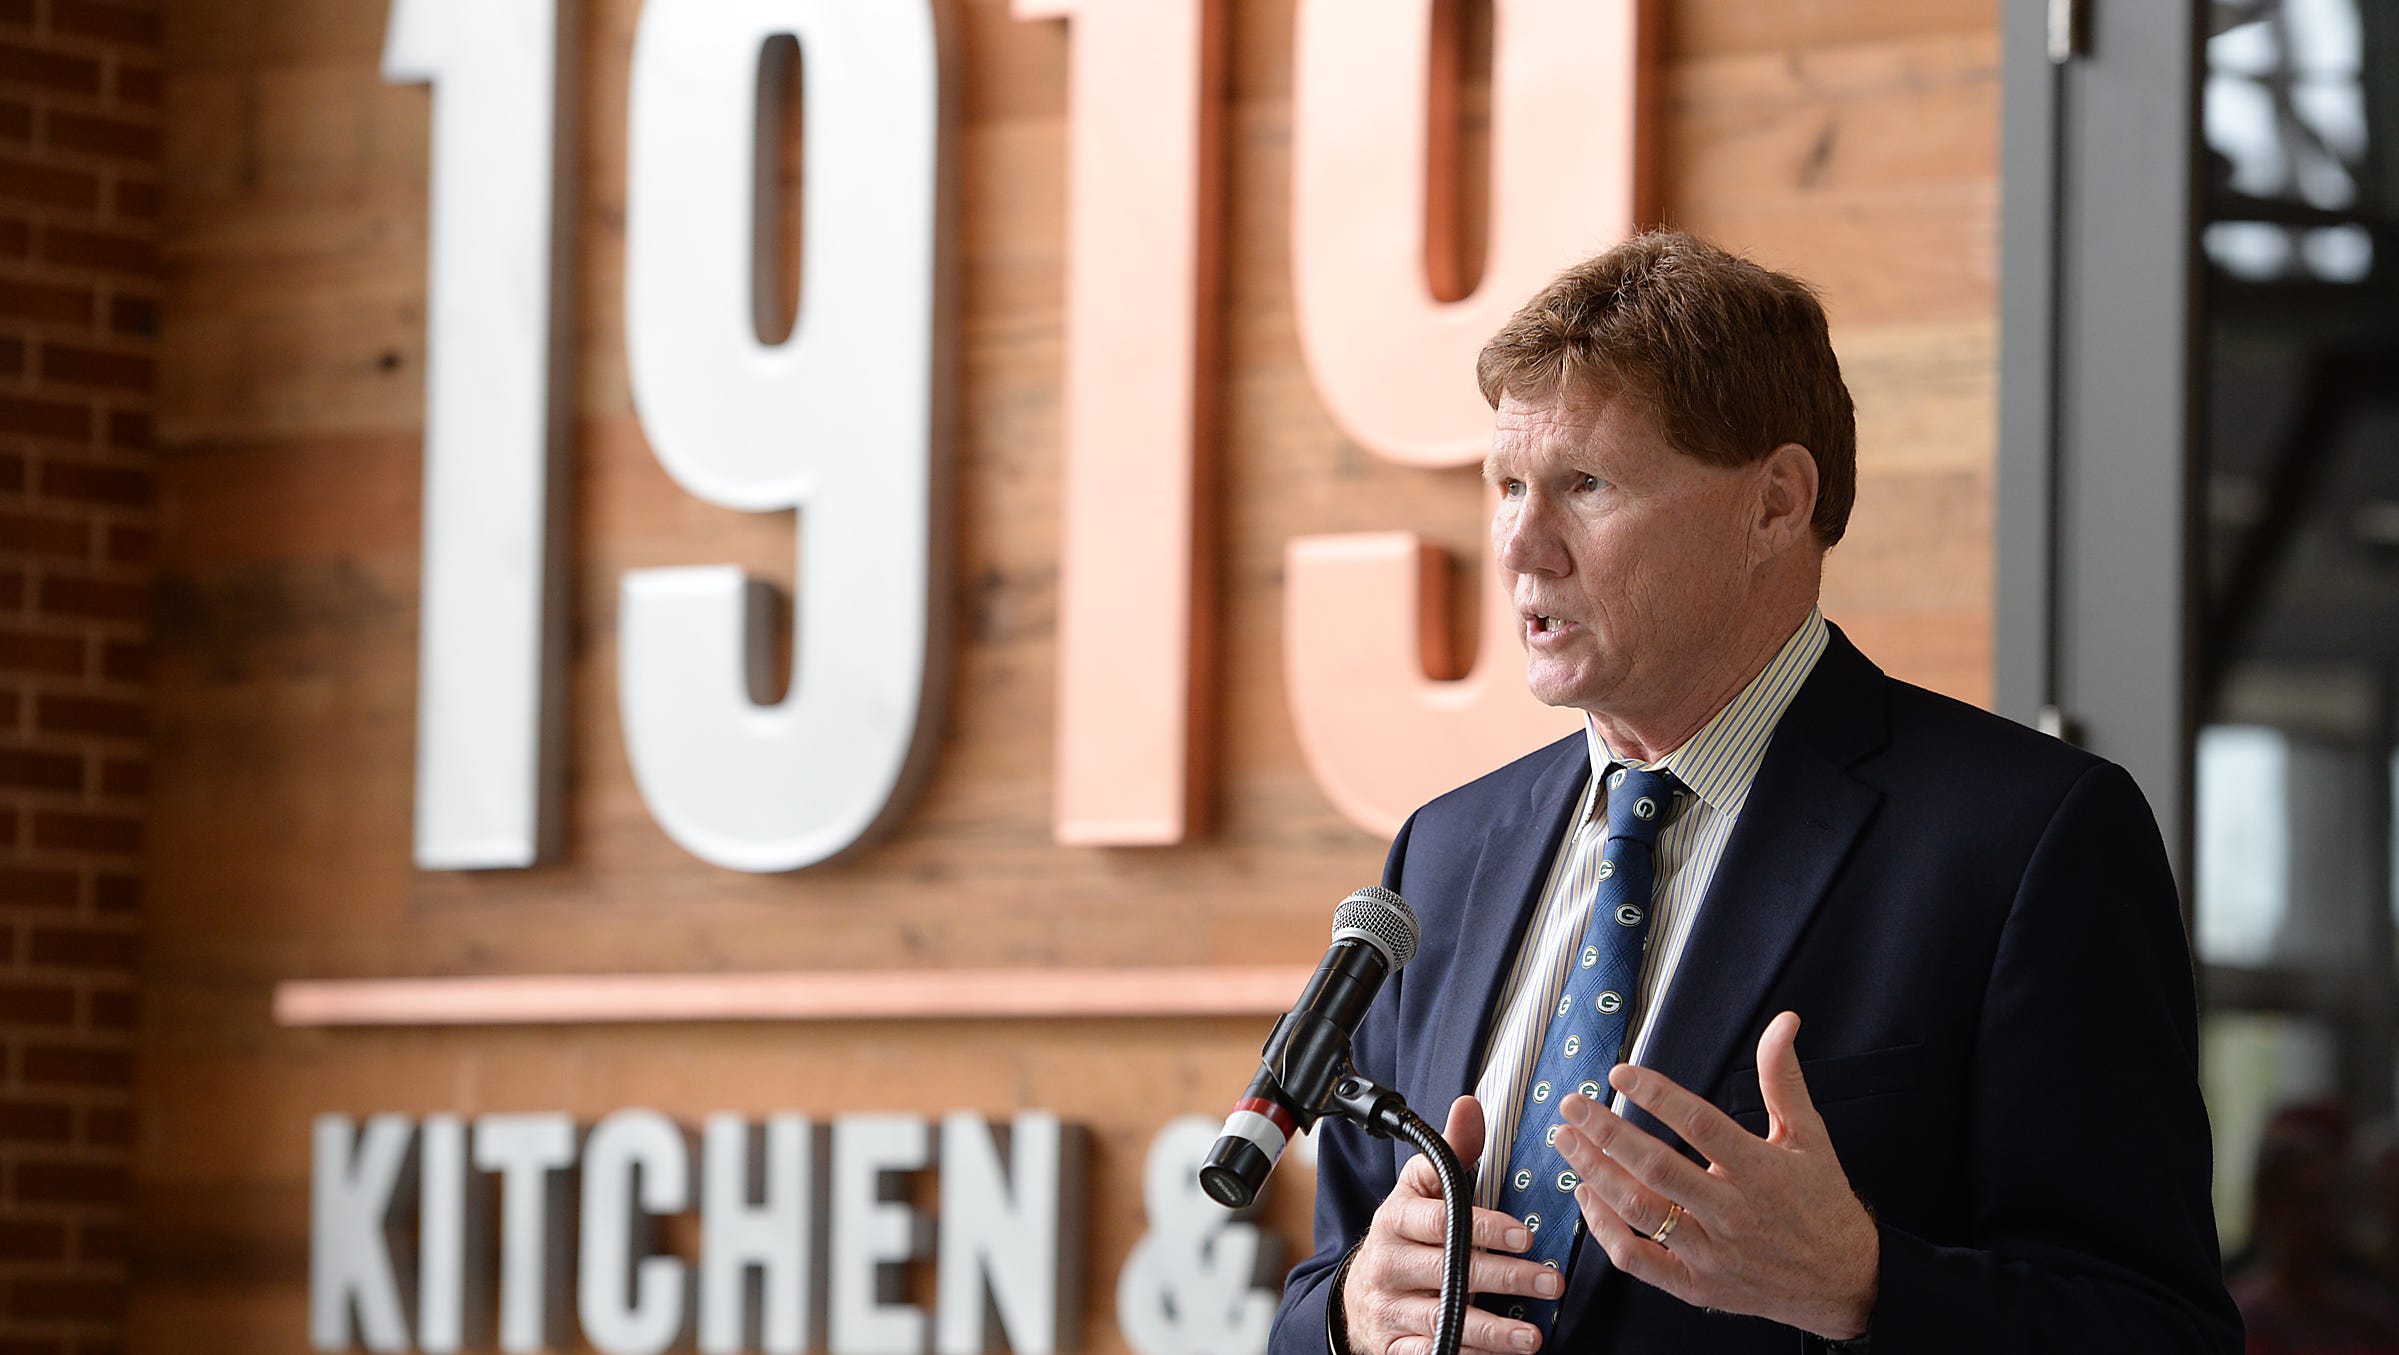 1919 Kitchen and Tap opened July 24, 2015 inside the Lambeau Atrium. Packers president Mark Murphy talks about the long planning process to complete the atrium project during the grand opening of the new eatery.